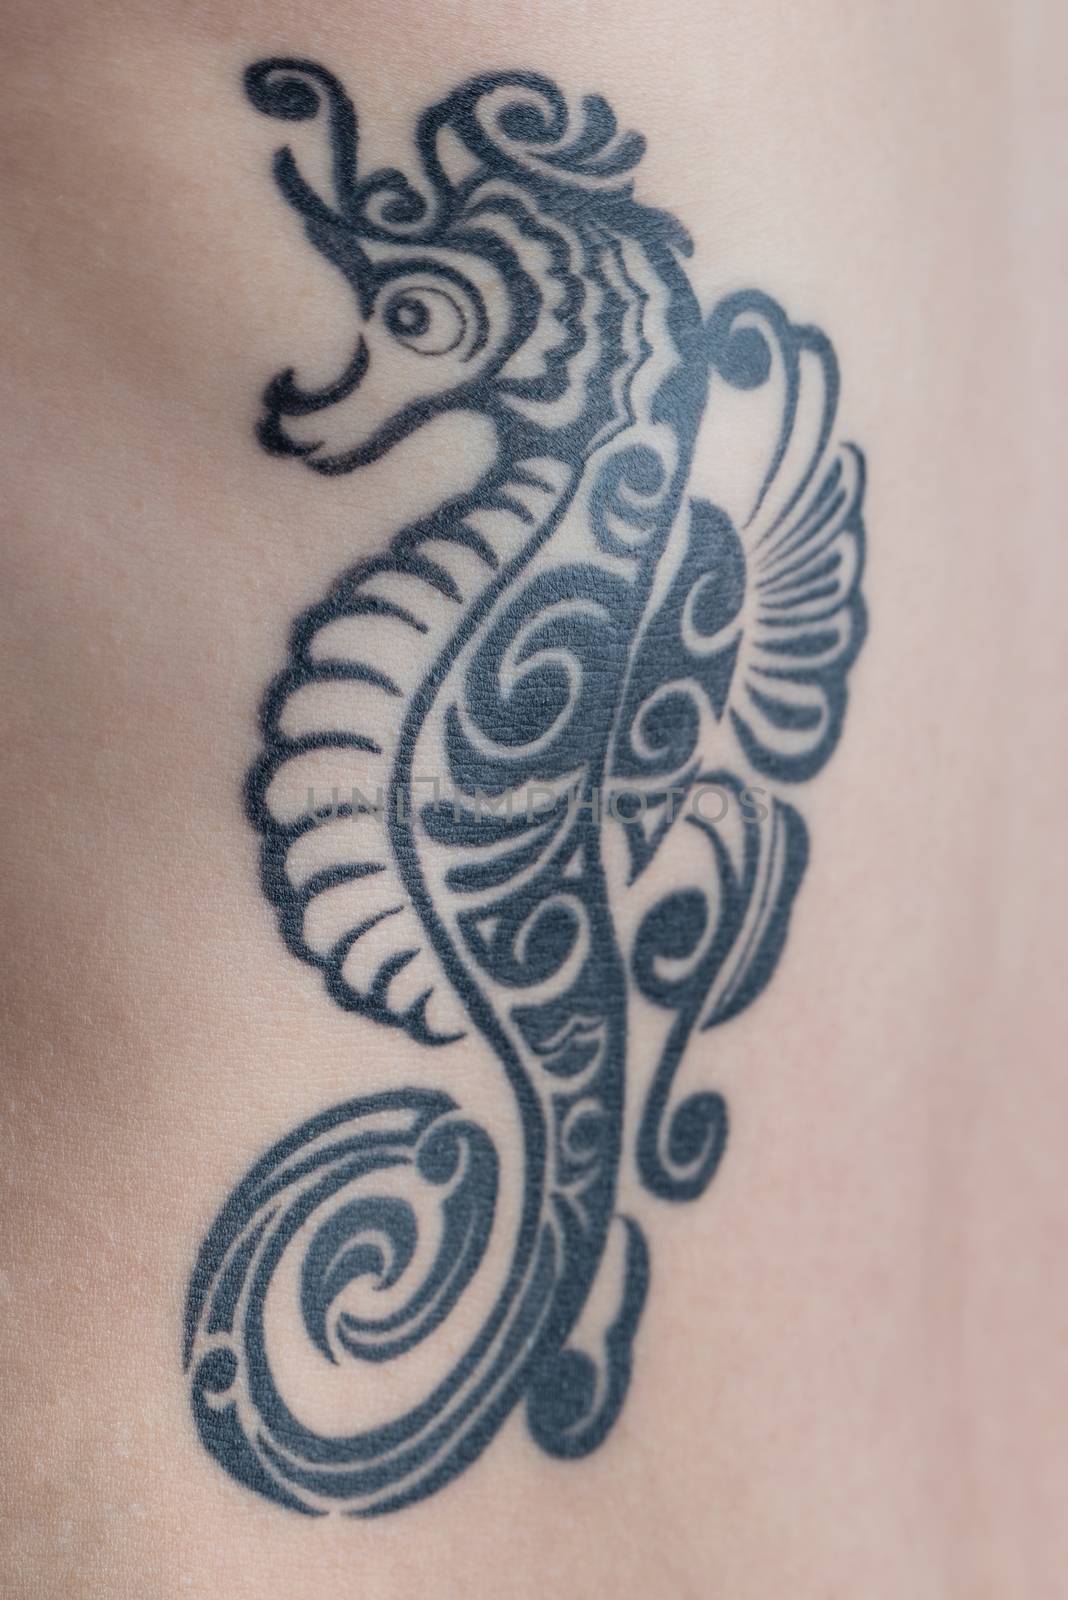 Seahorse on Ribs Tattoo by justtscott